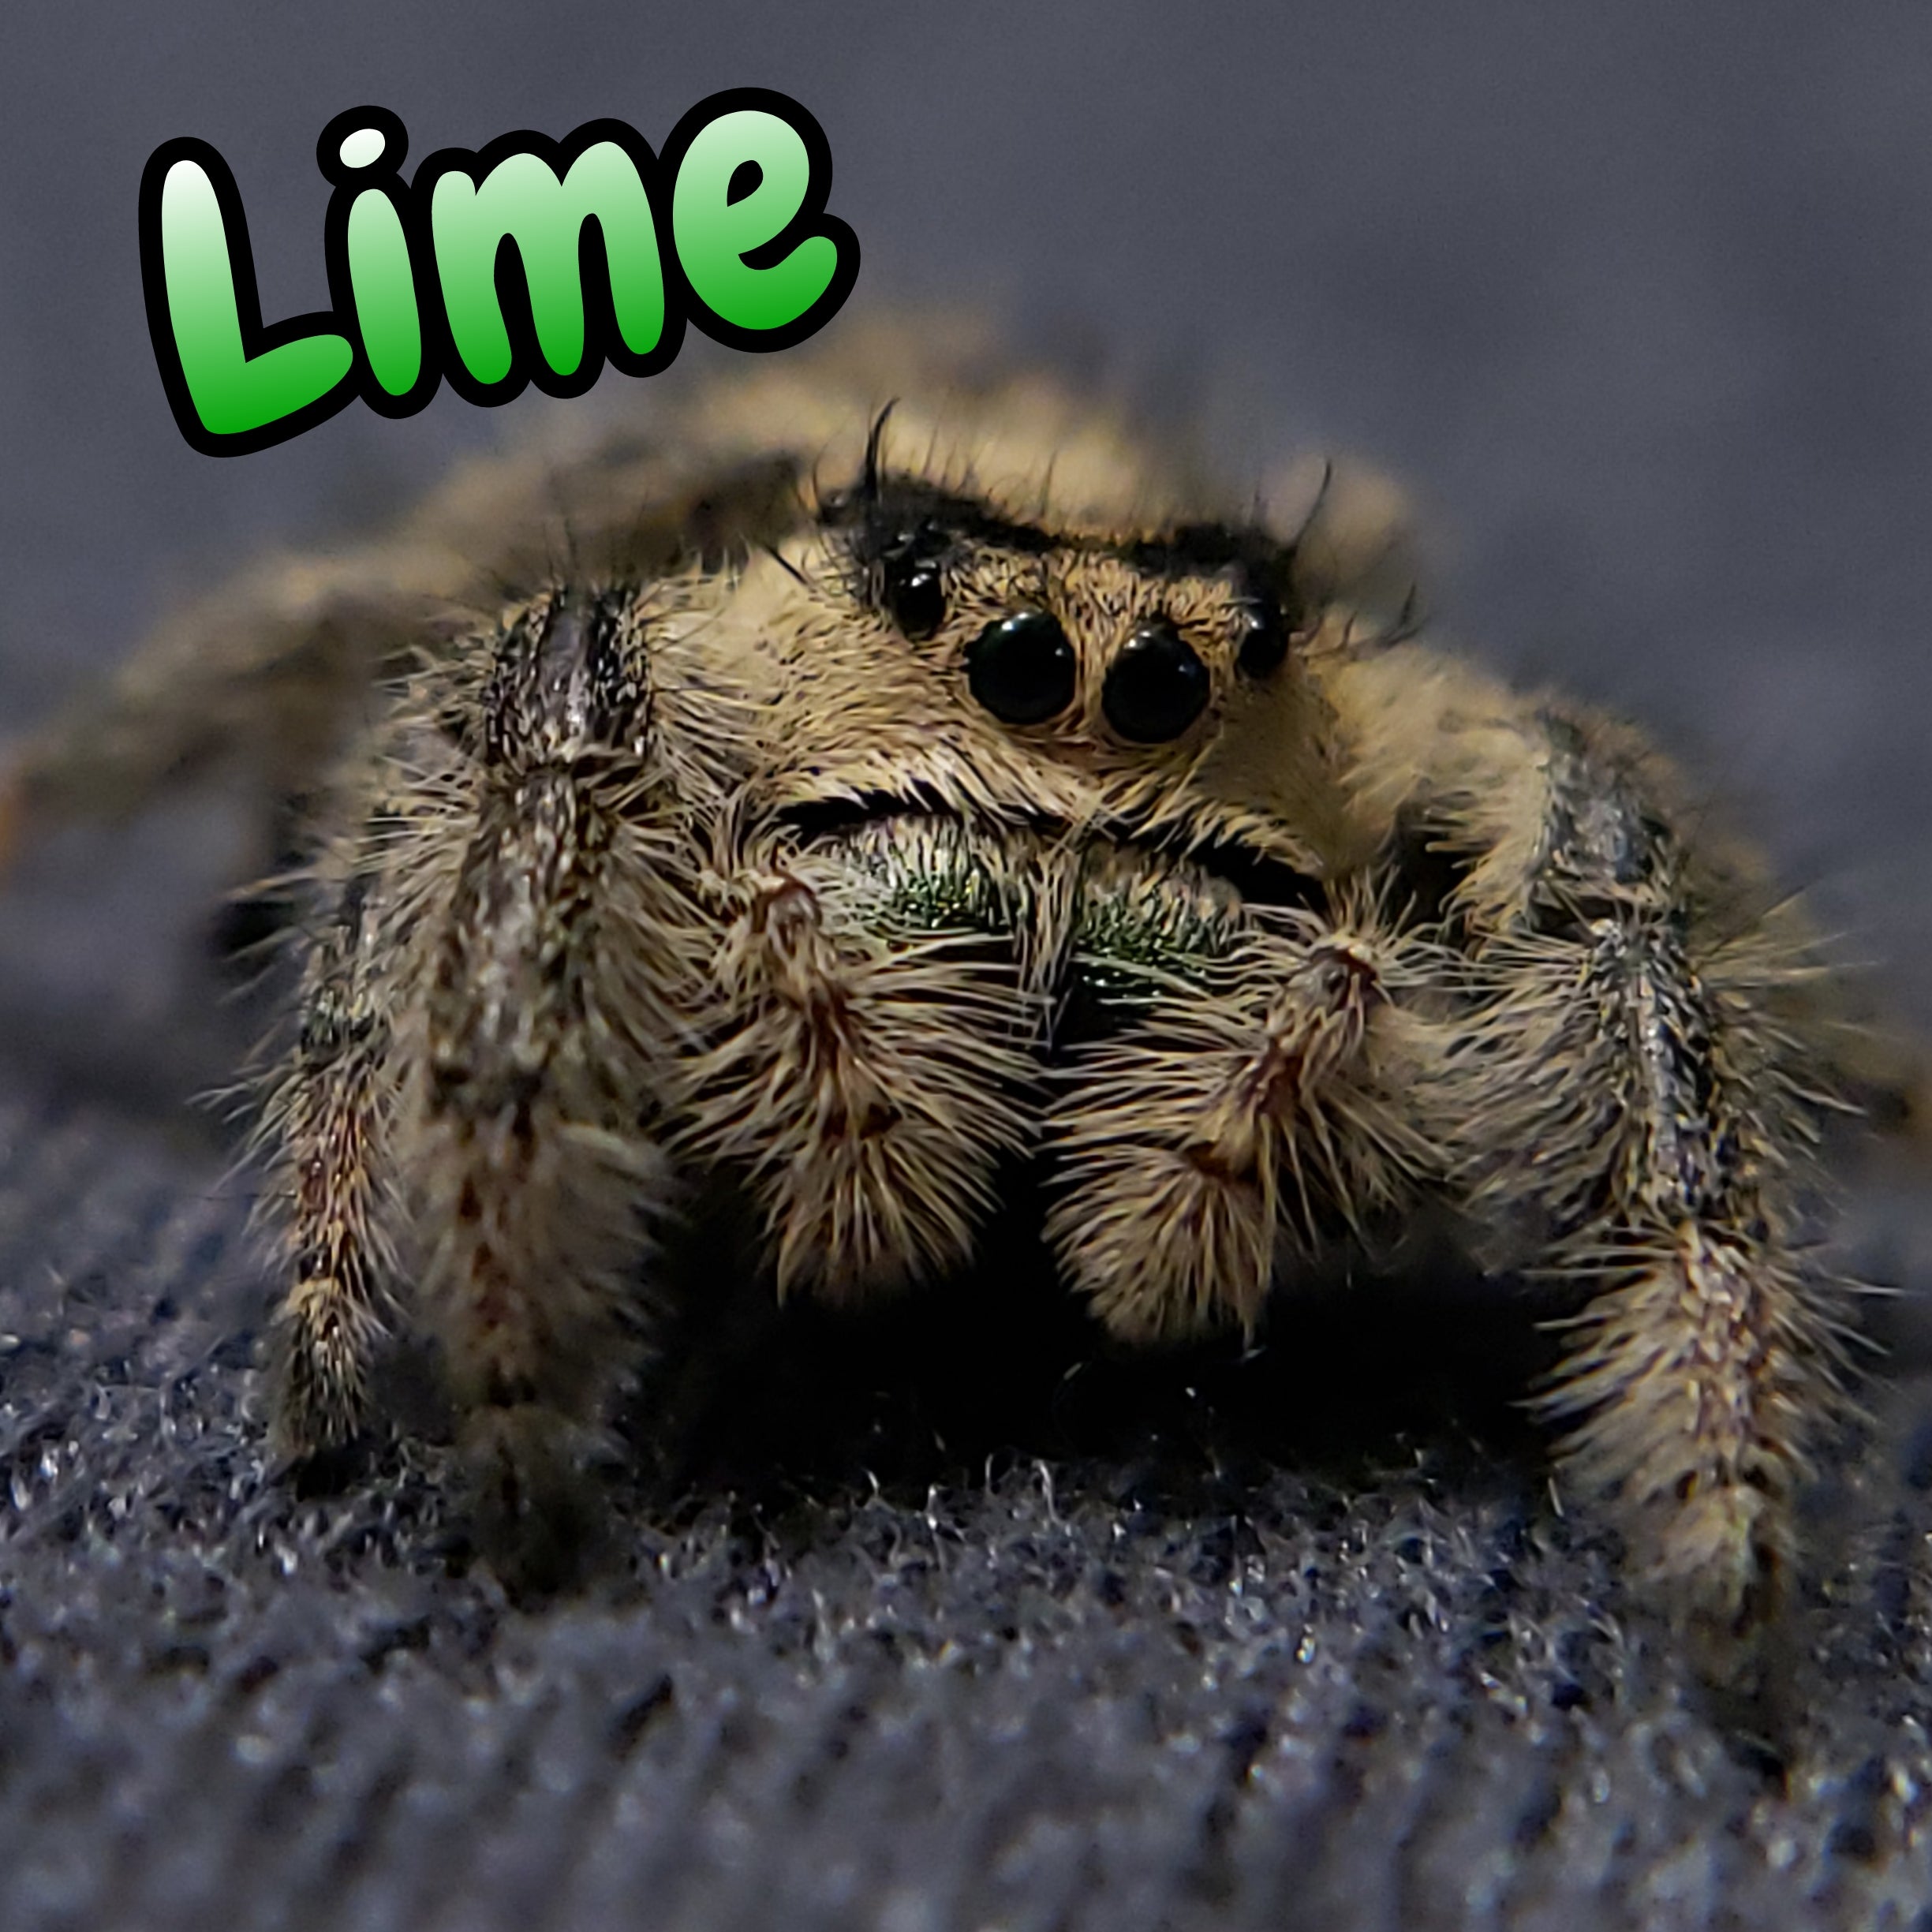 Regal Jumping Spider "Lime"